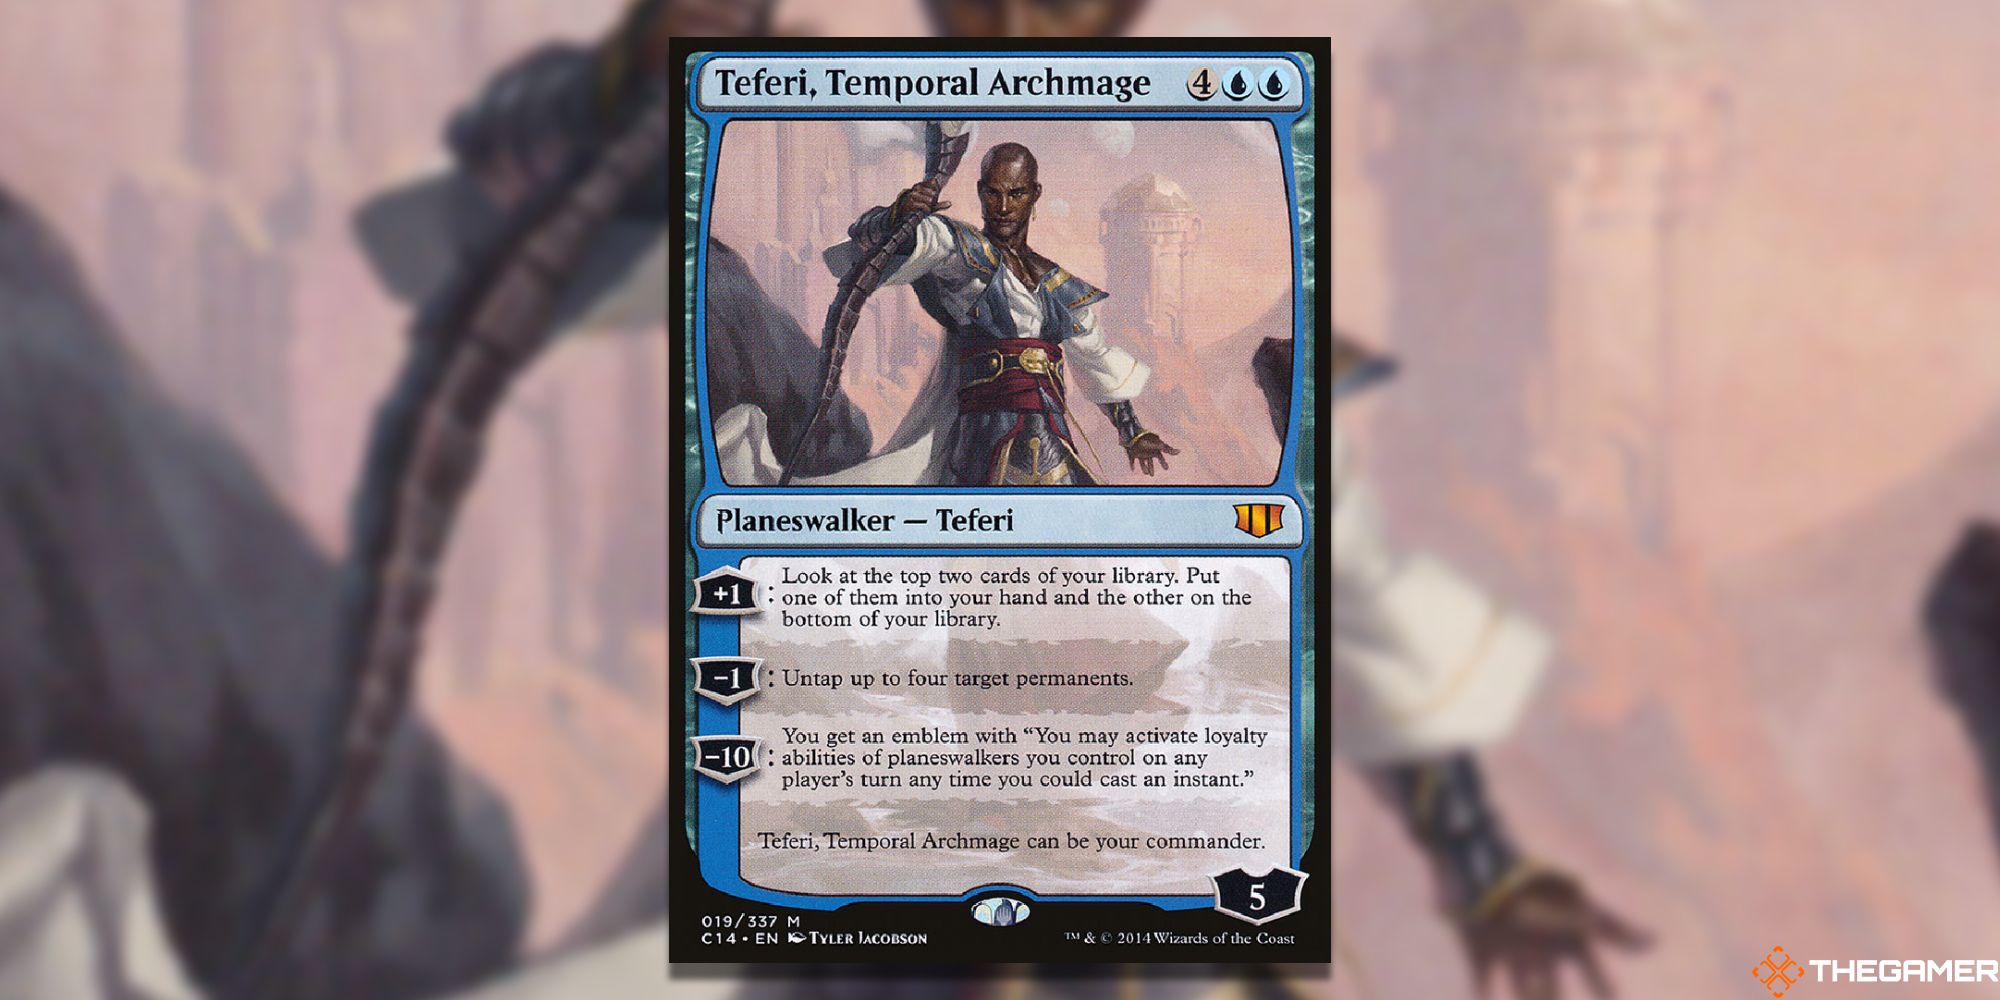 Teferi, Temporal Archmage card from Commander 2014